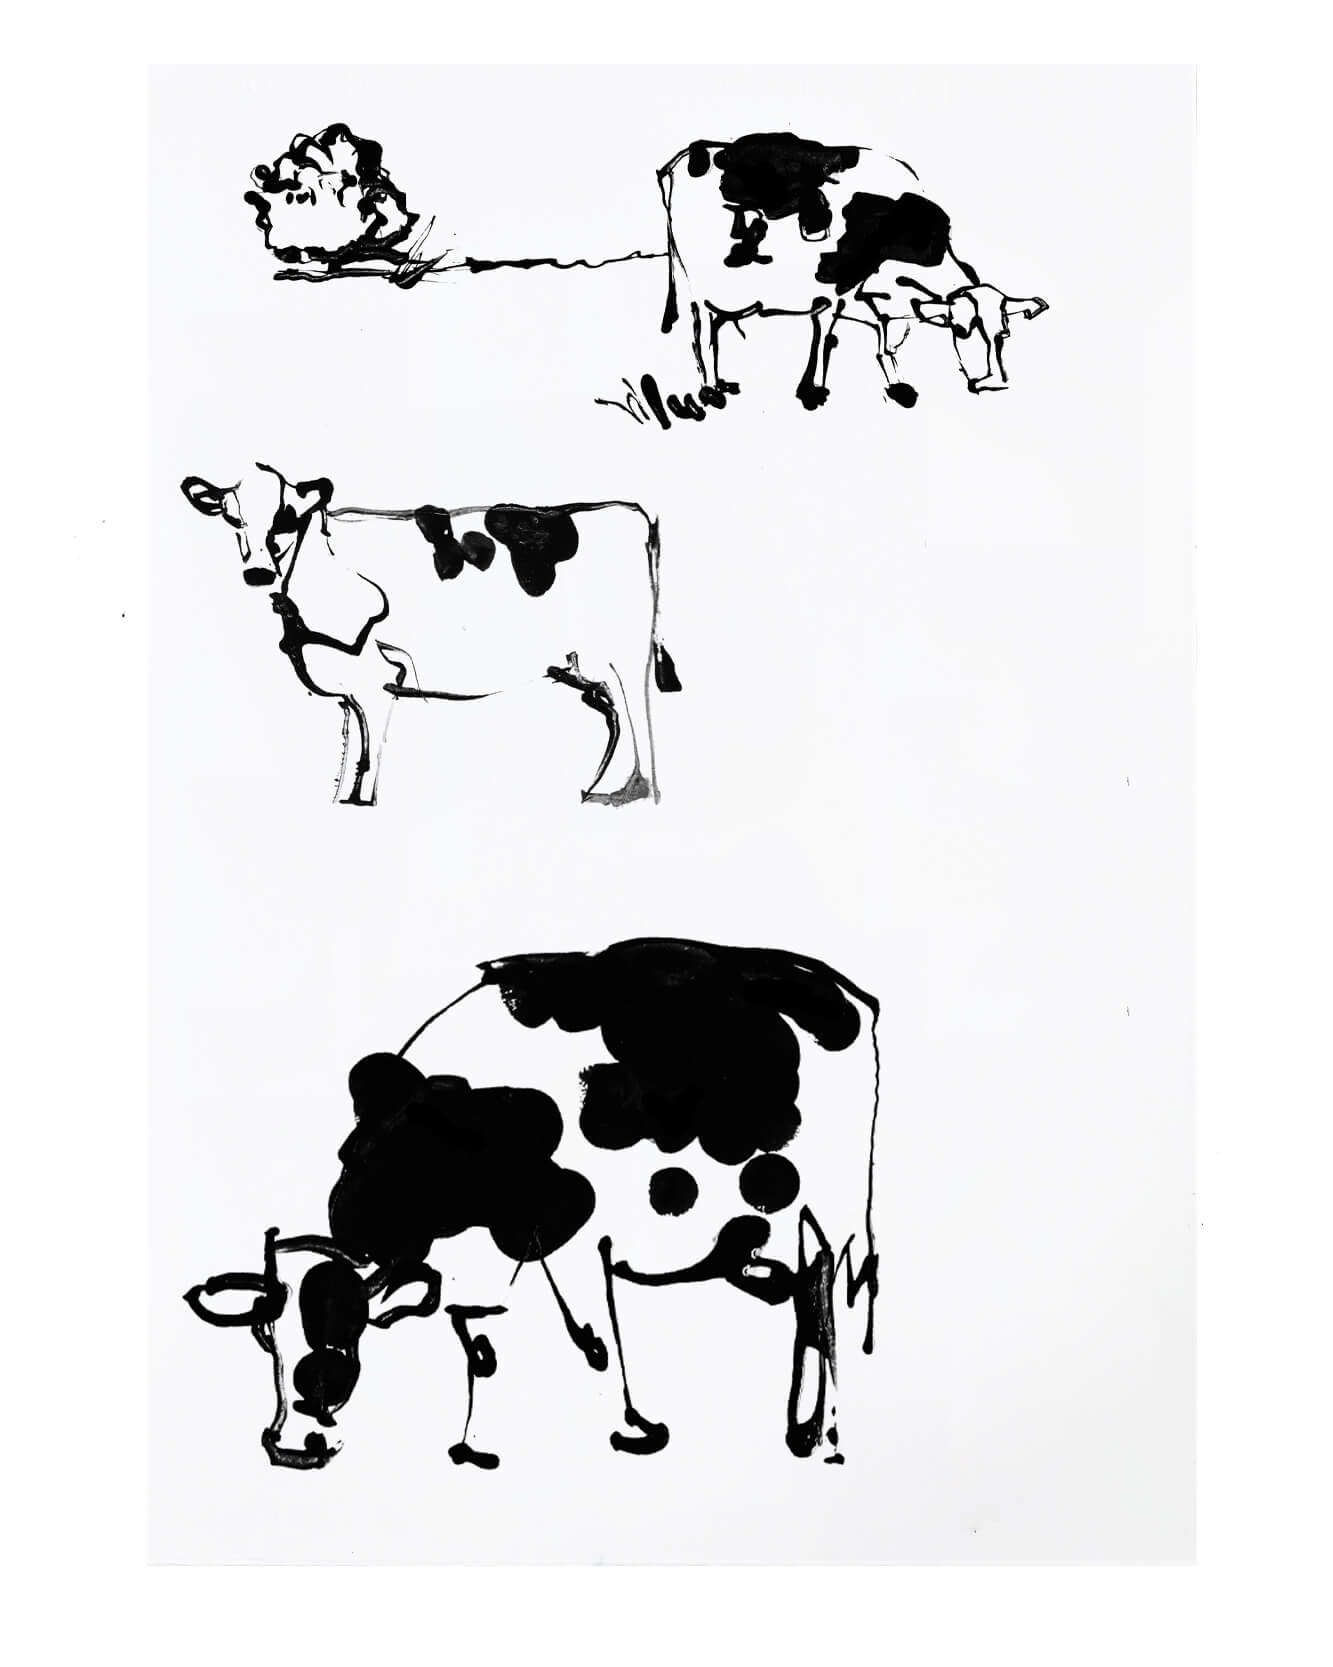 An artists sketchbook of line drawings inspired by an opportunity to capture UK food produce from all regions of the Uk. From sketch to full colour illustrations. Drawings of cows and chickens.